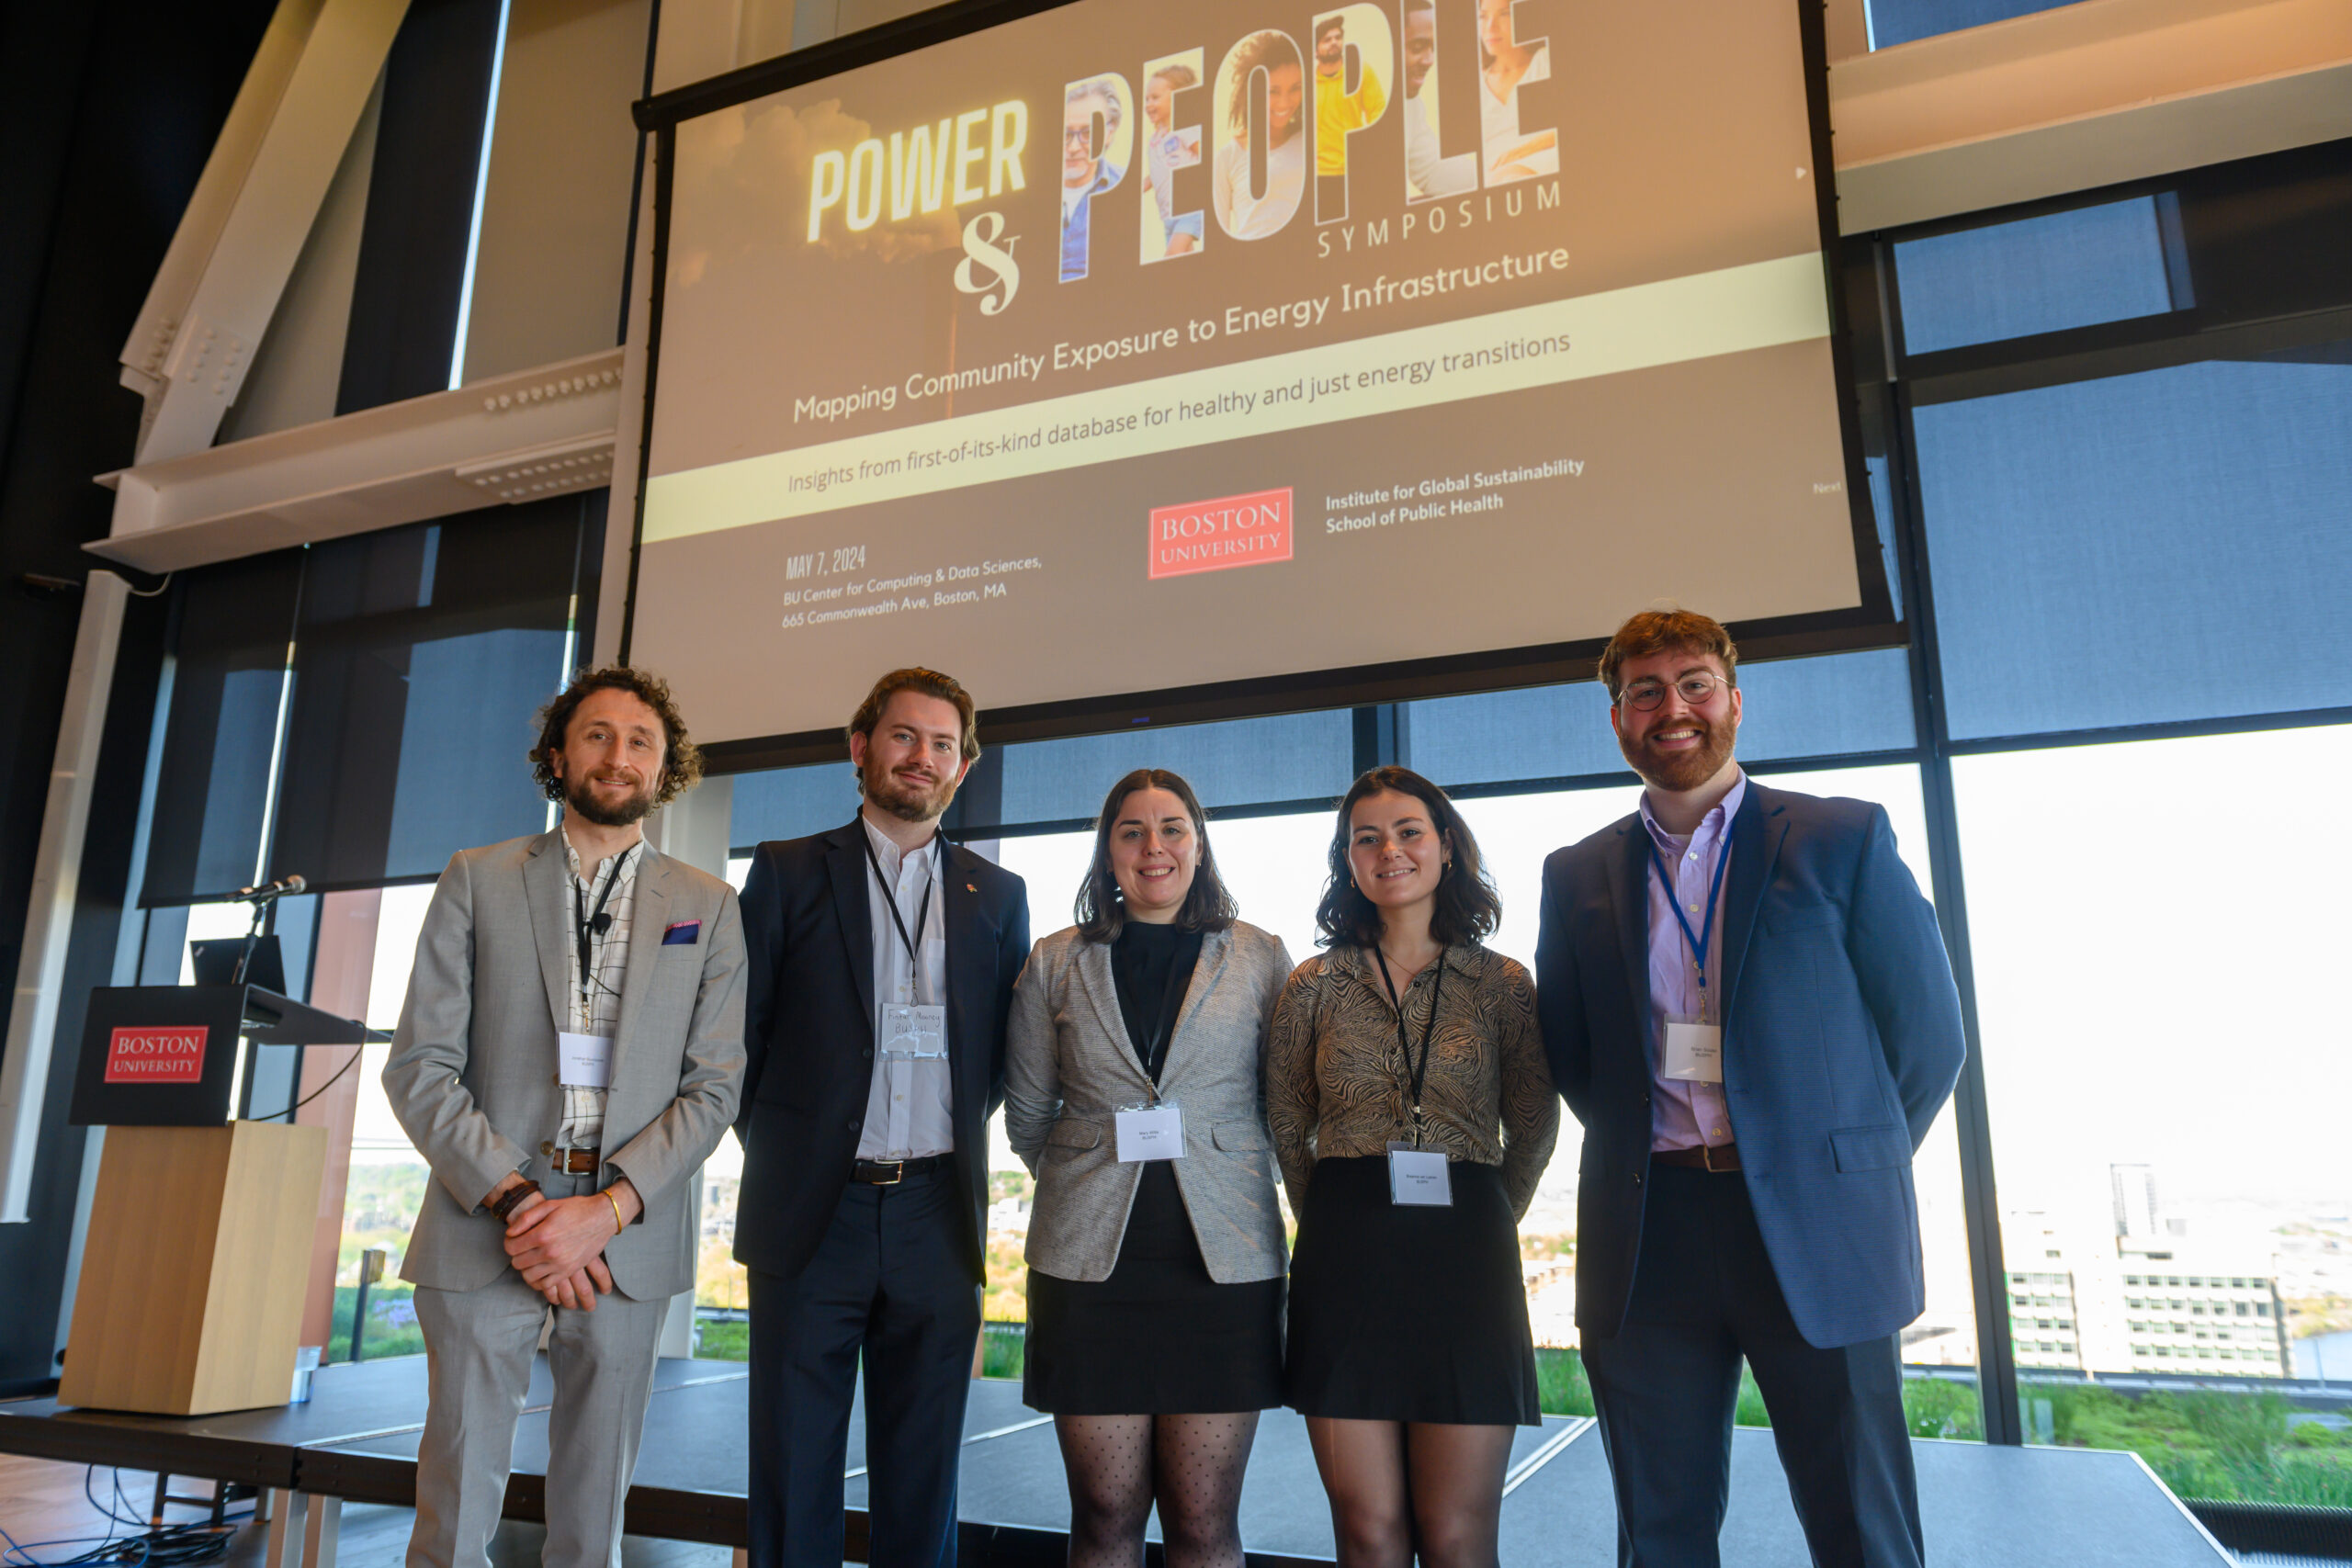 Power and People Symposium